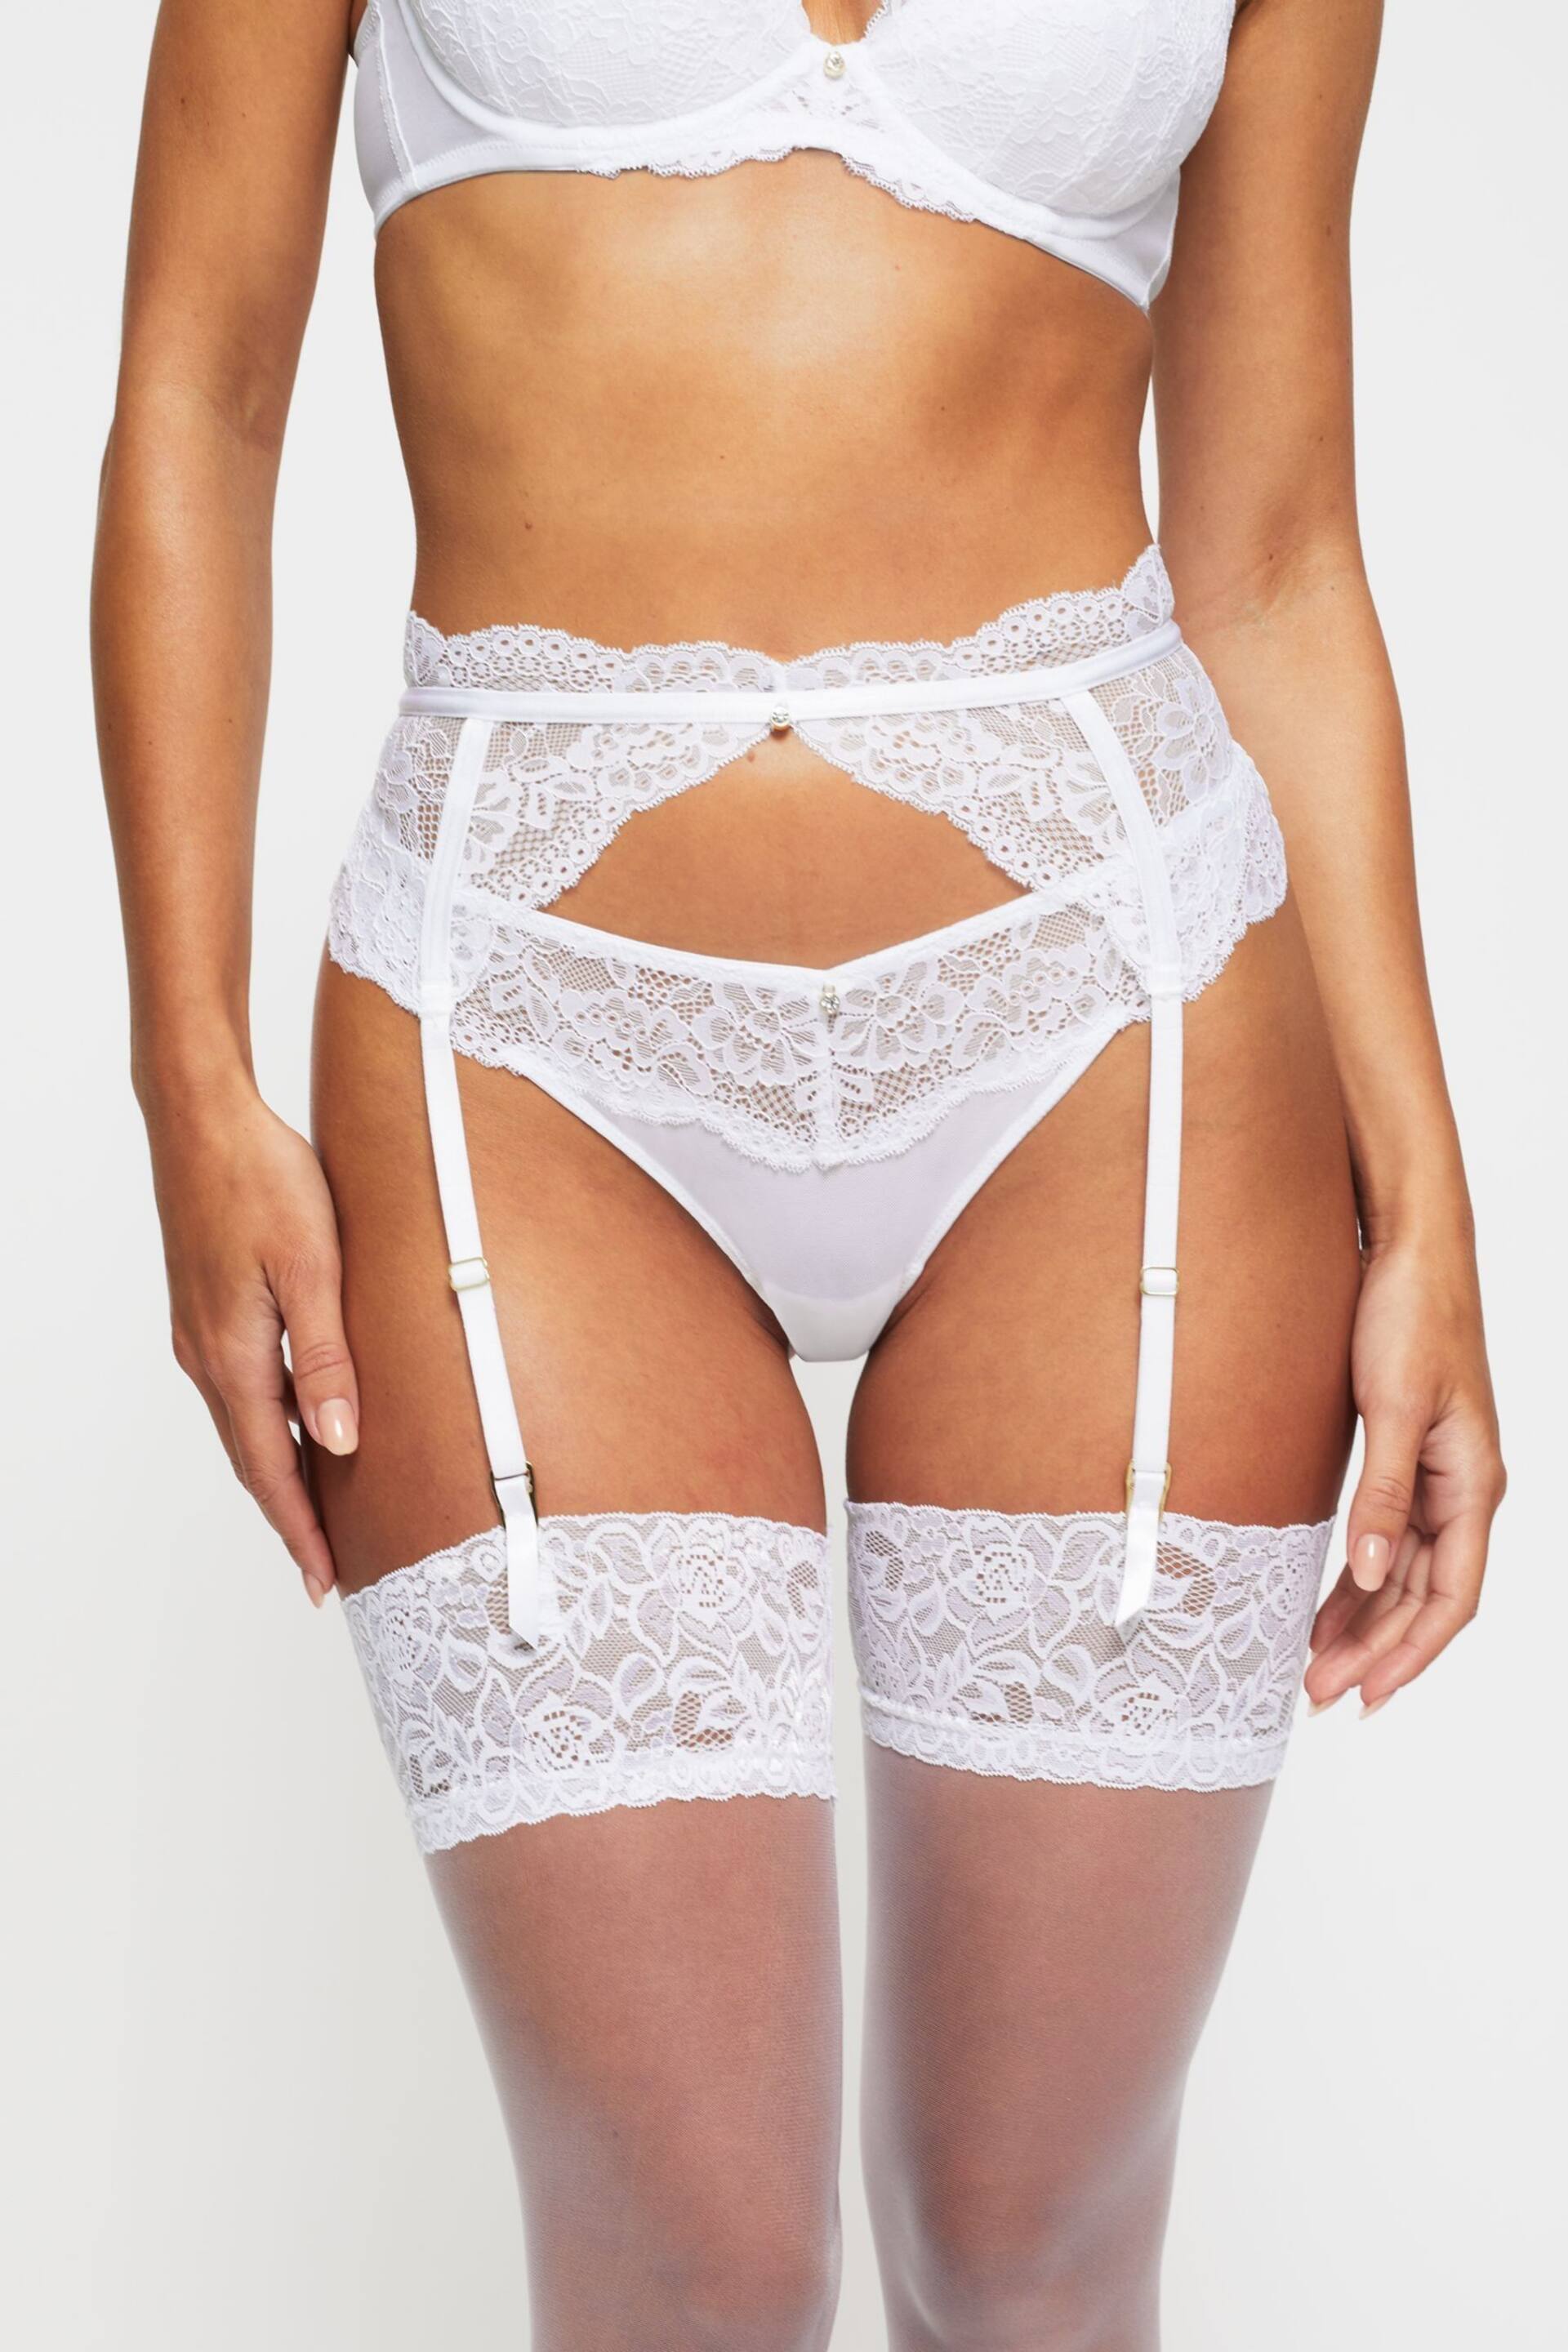 Ann Summers White Sexy Lace Planet Suspender Belt - Image 1 of 6